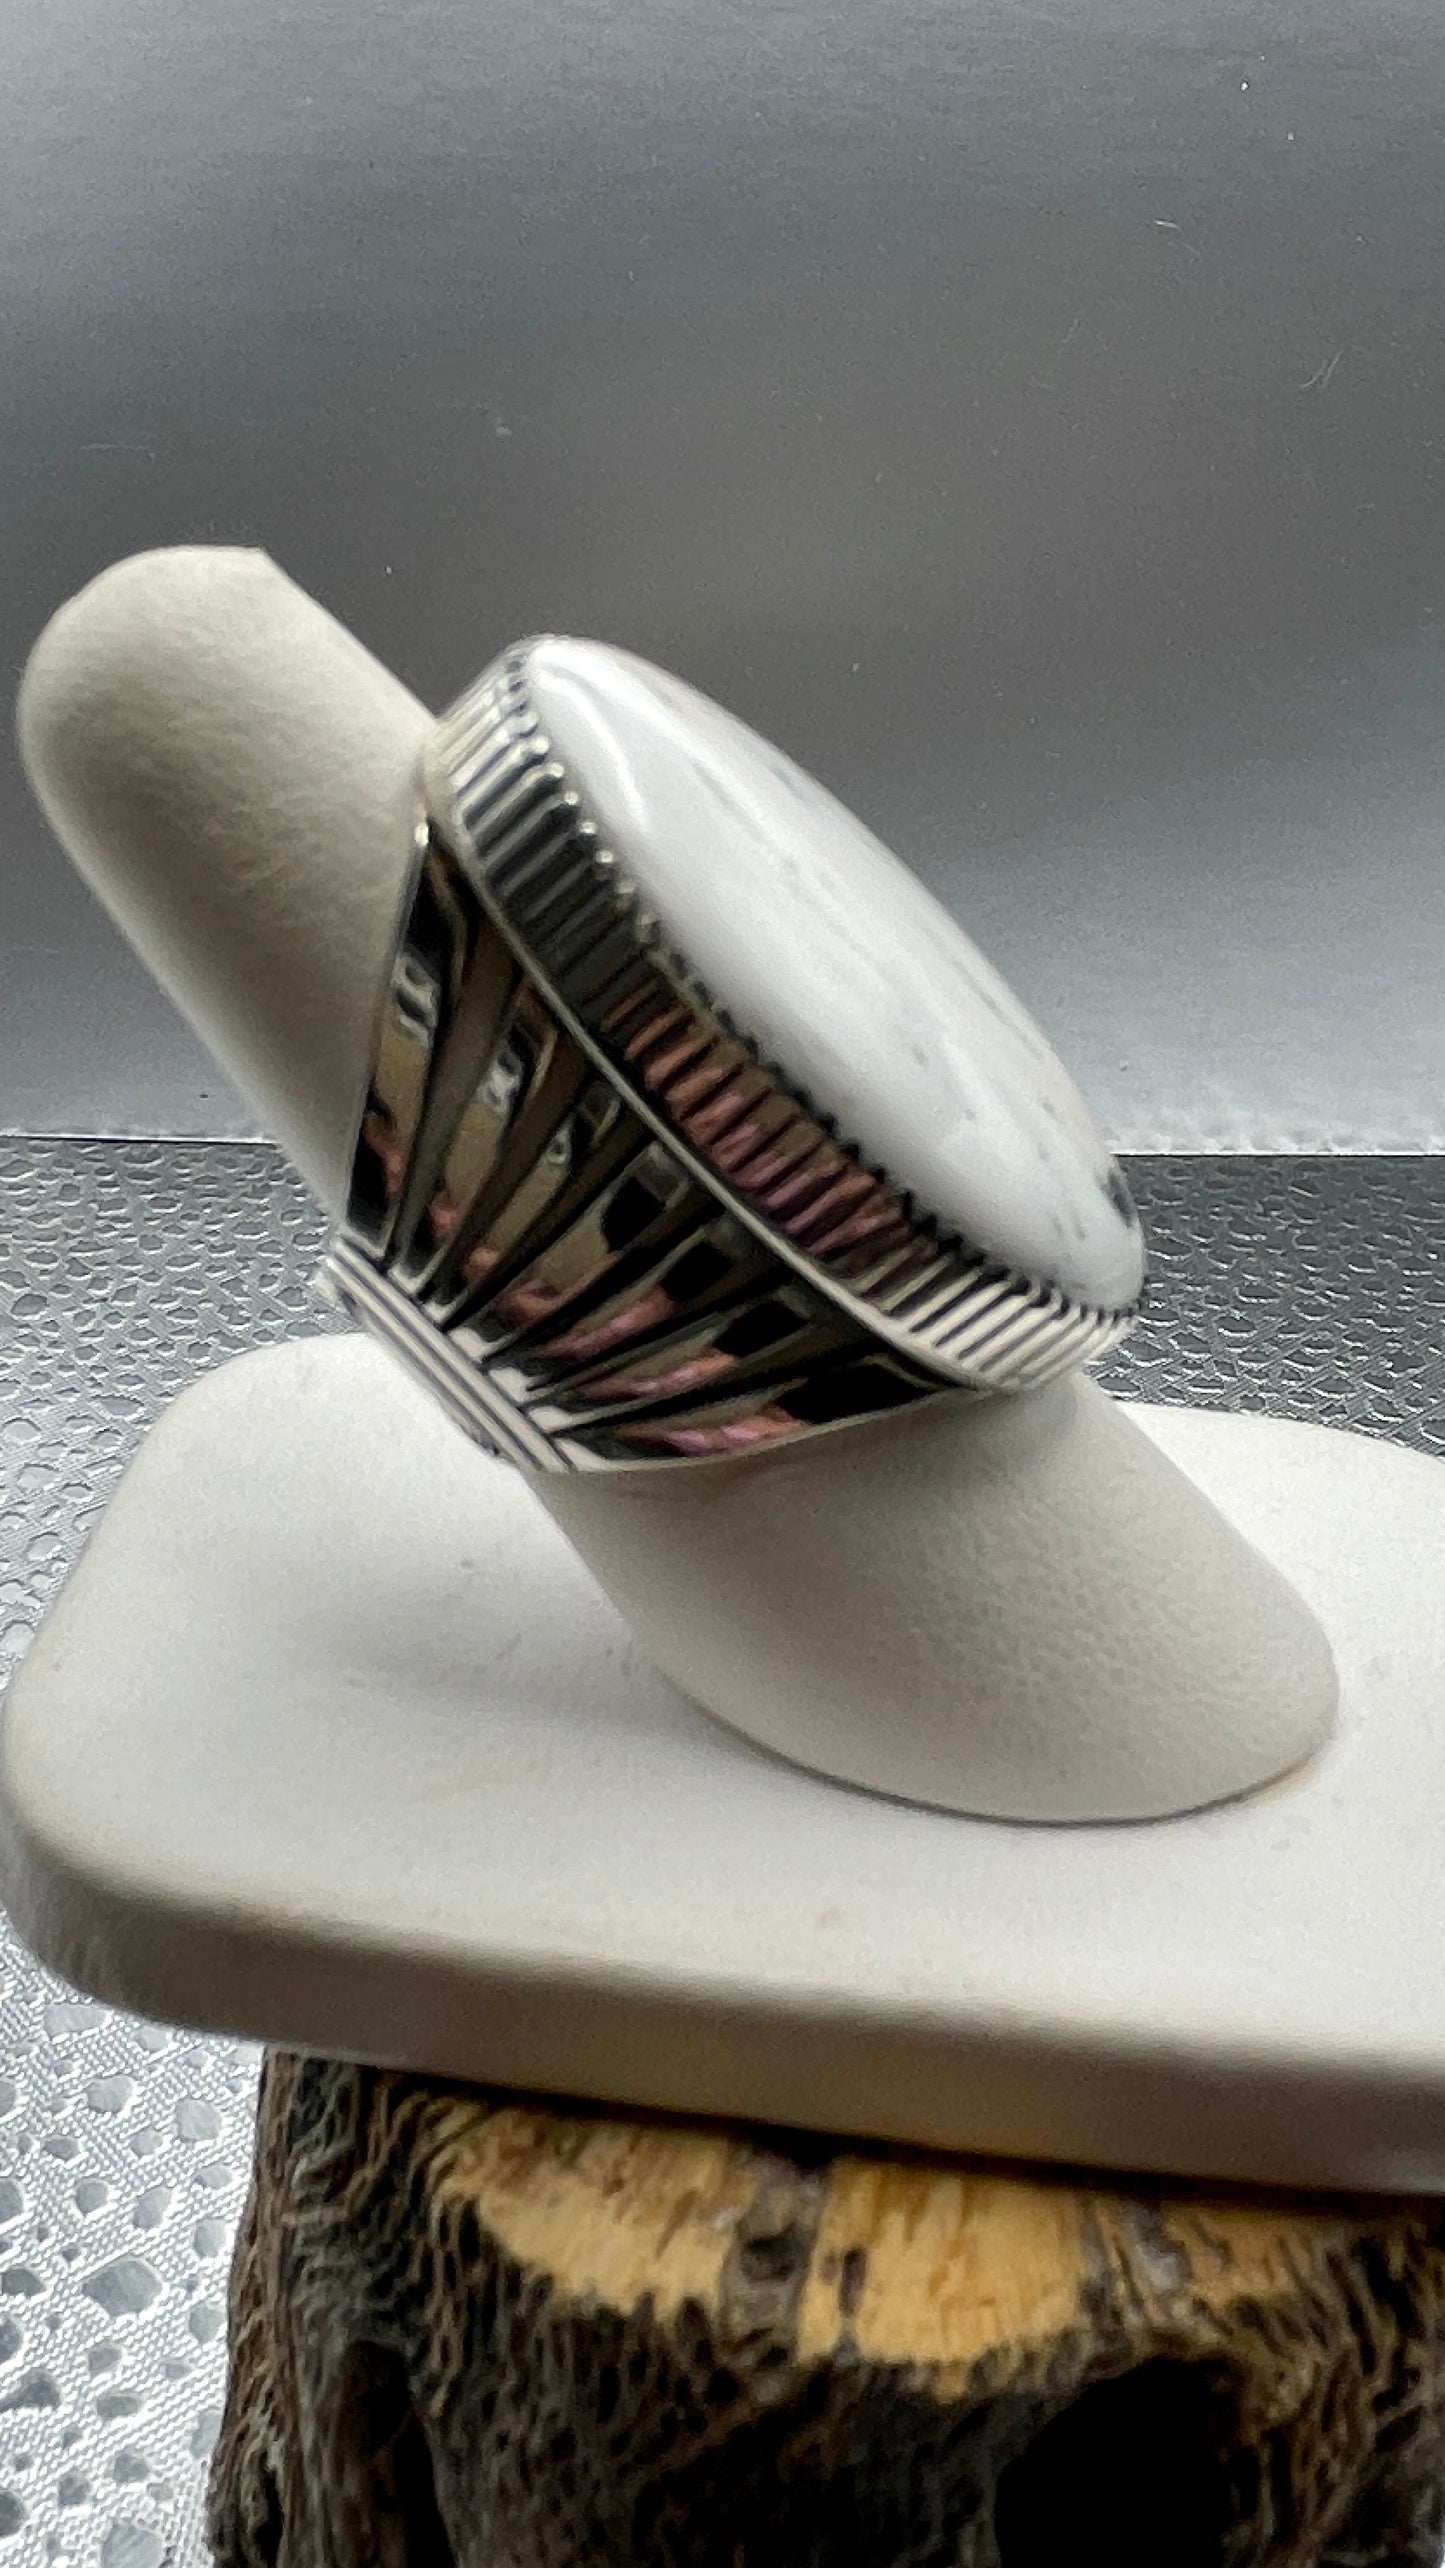 Desert Treasure: White Buffalo ring with black and white stone set in Sterling Silver